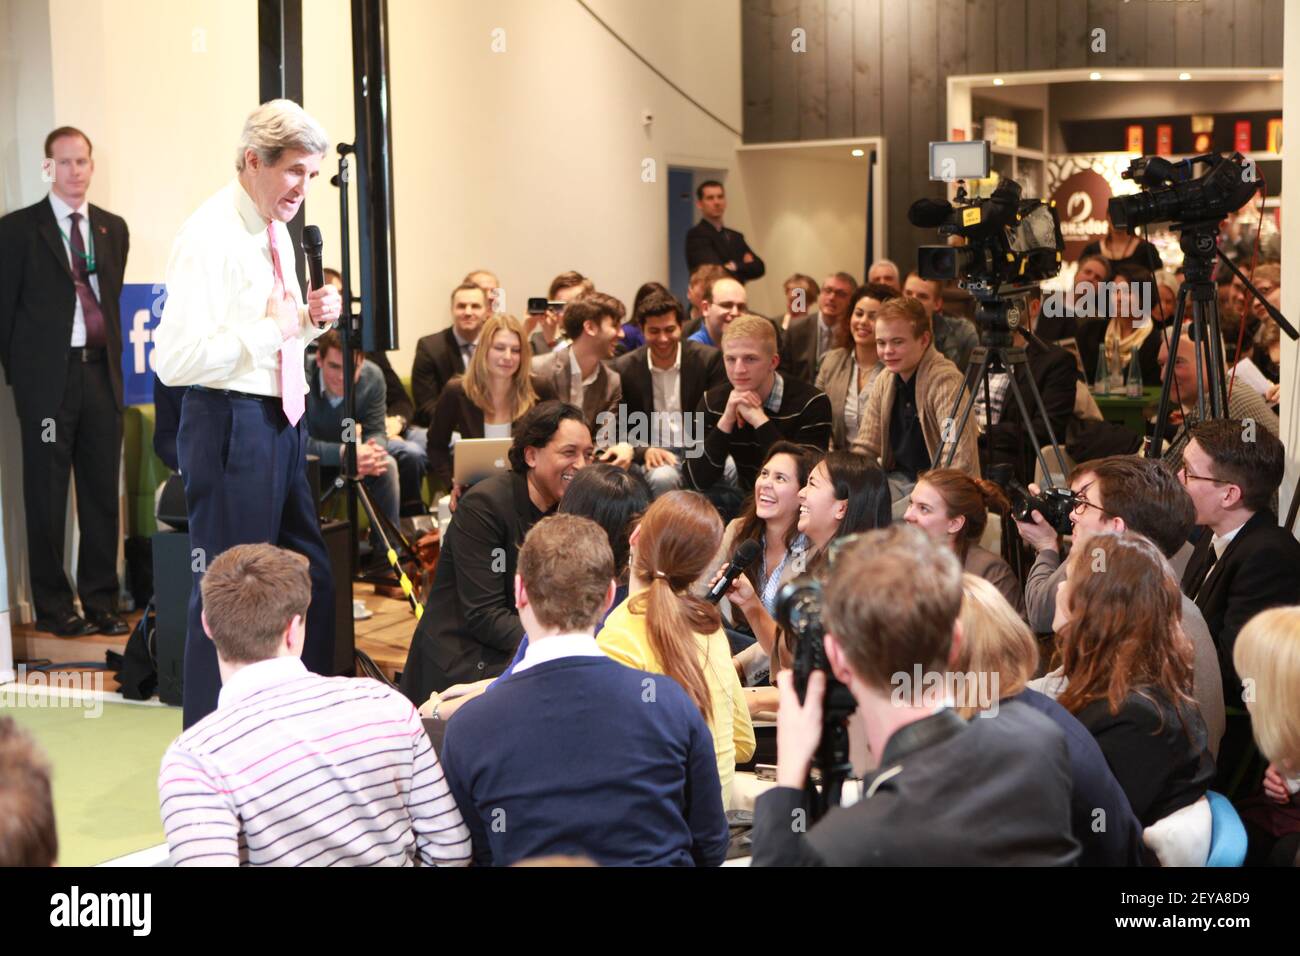 Feb 26, 2013 - Berlin, Germany - U.S. Secretary of State John Kerry engages young German innovators and leaders at his first Youth Connect event with moderator/journalist Cherno Jobatey in Berlin, Germany, February 26, 2013. Photo Credit: State Department/Sipa USA Stock Photo